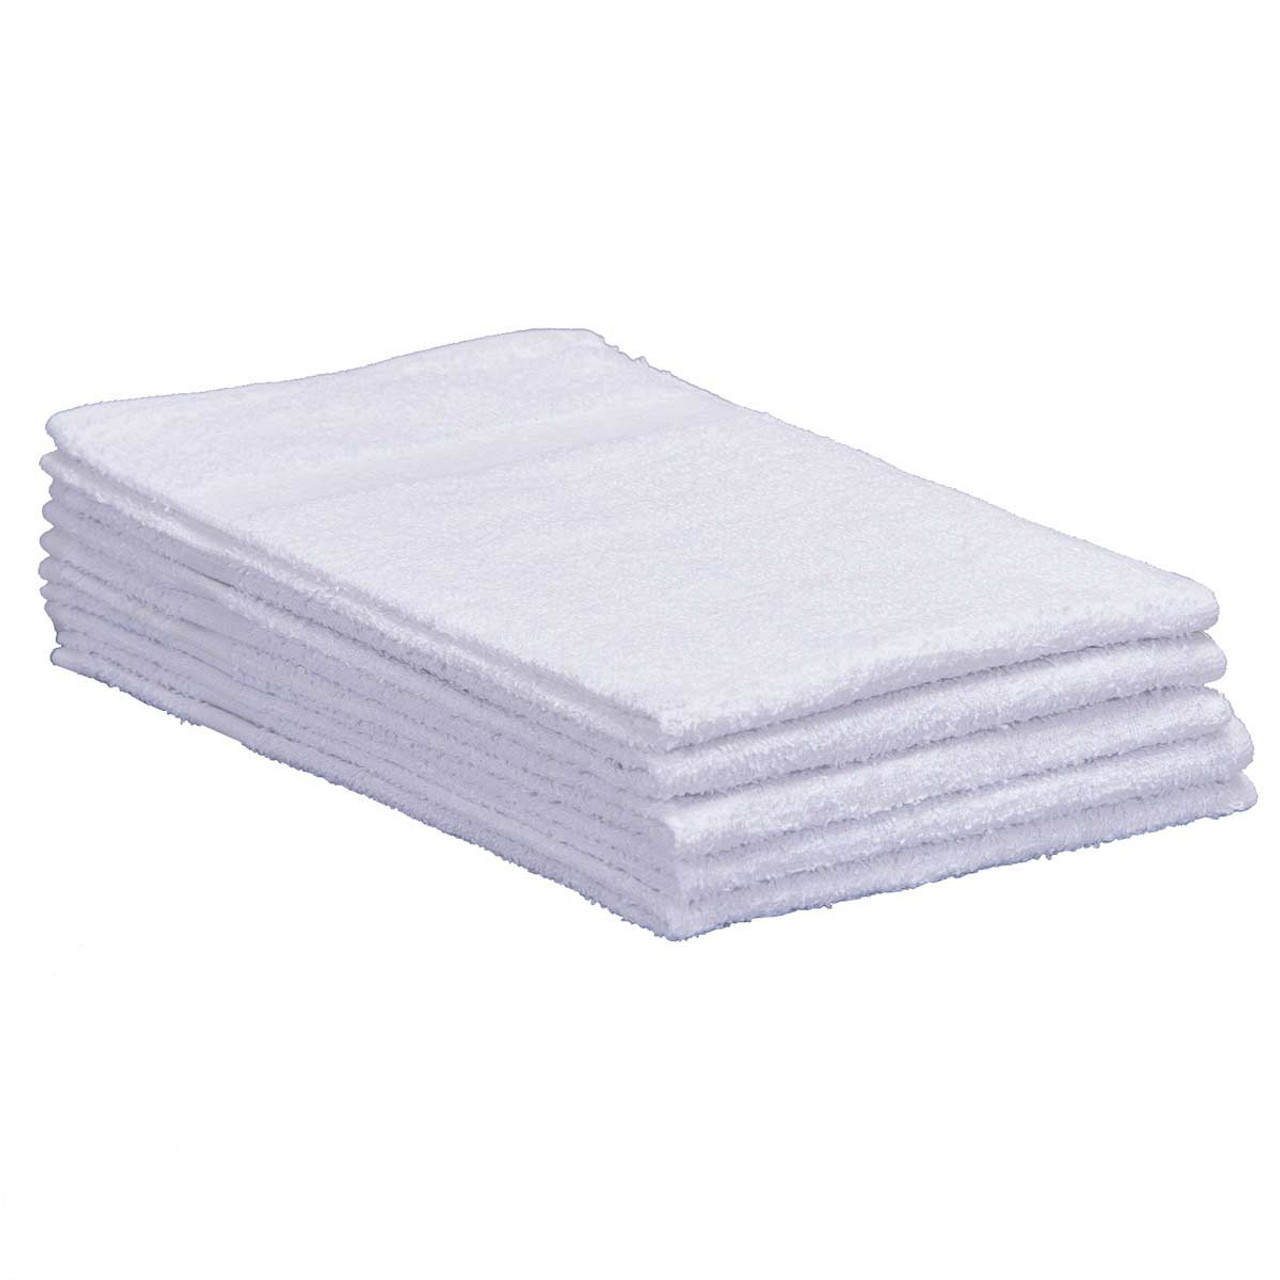 https://cdn11.bigcommerce.com/s-a5uwe4c7wz/images/stencil/1280x1280/products/487/1829/Towels-Lightweight-Cotton-Terry-15x25-White__85187.1587390383.jpg?c=1